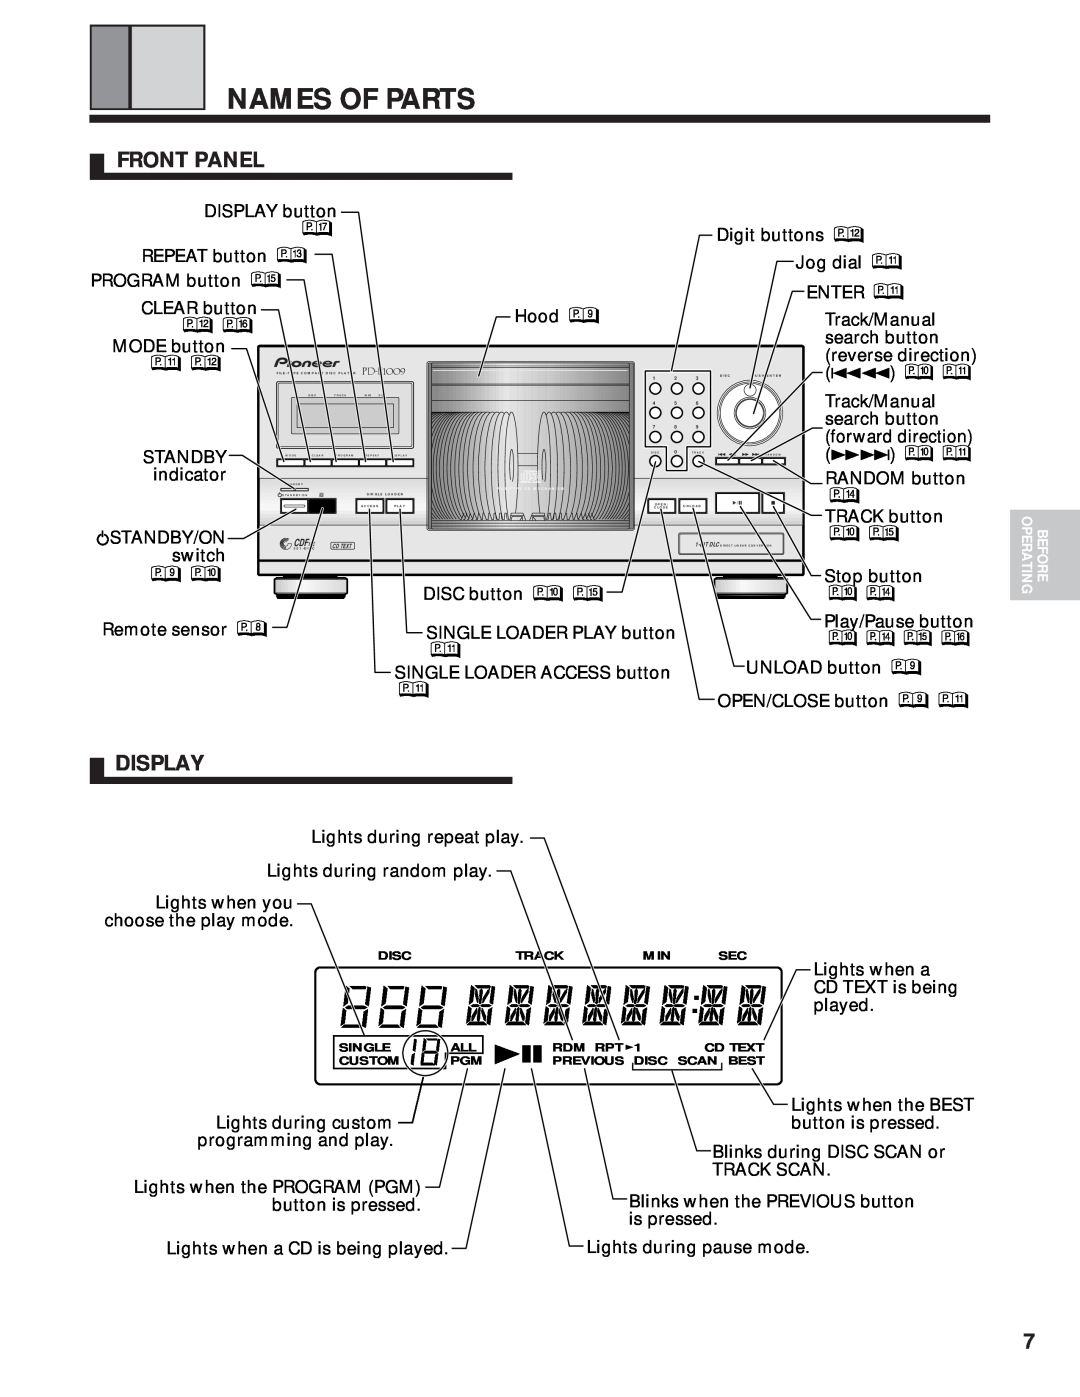 Pioneer PD-F1009 manual Names Of Parts, Front Panel, Display, 0$% 